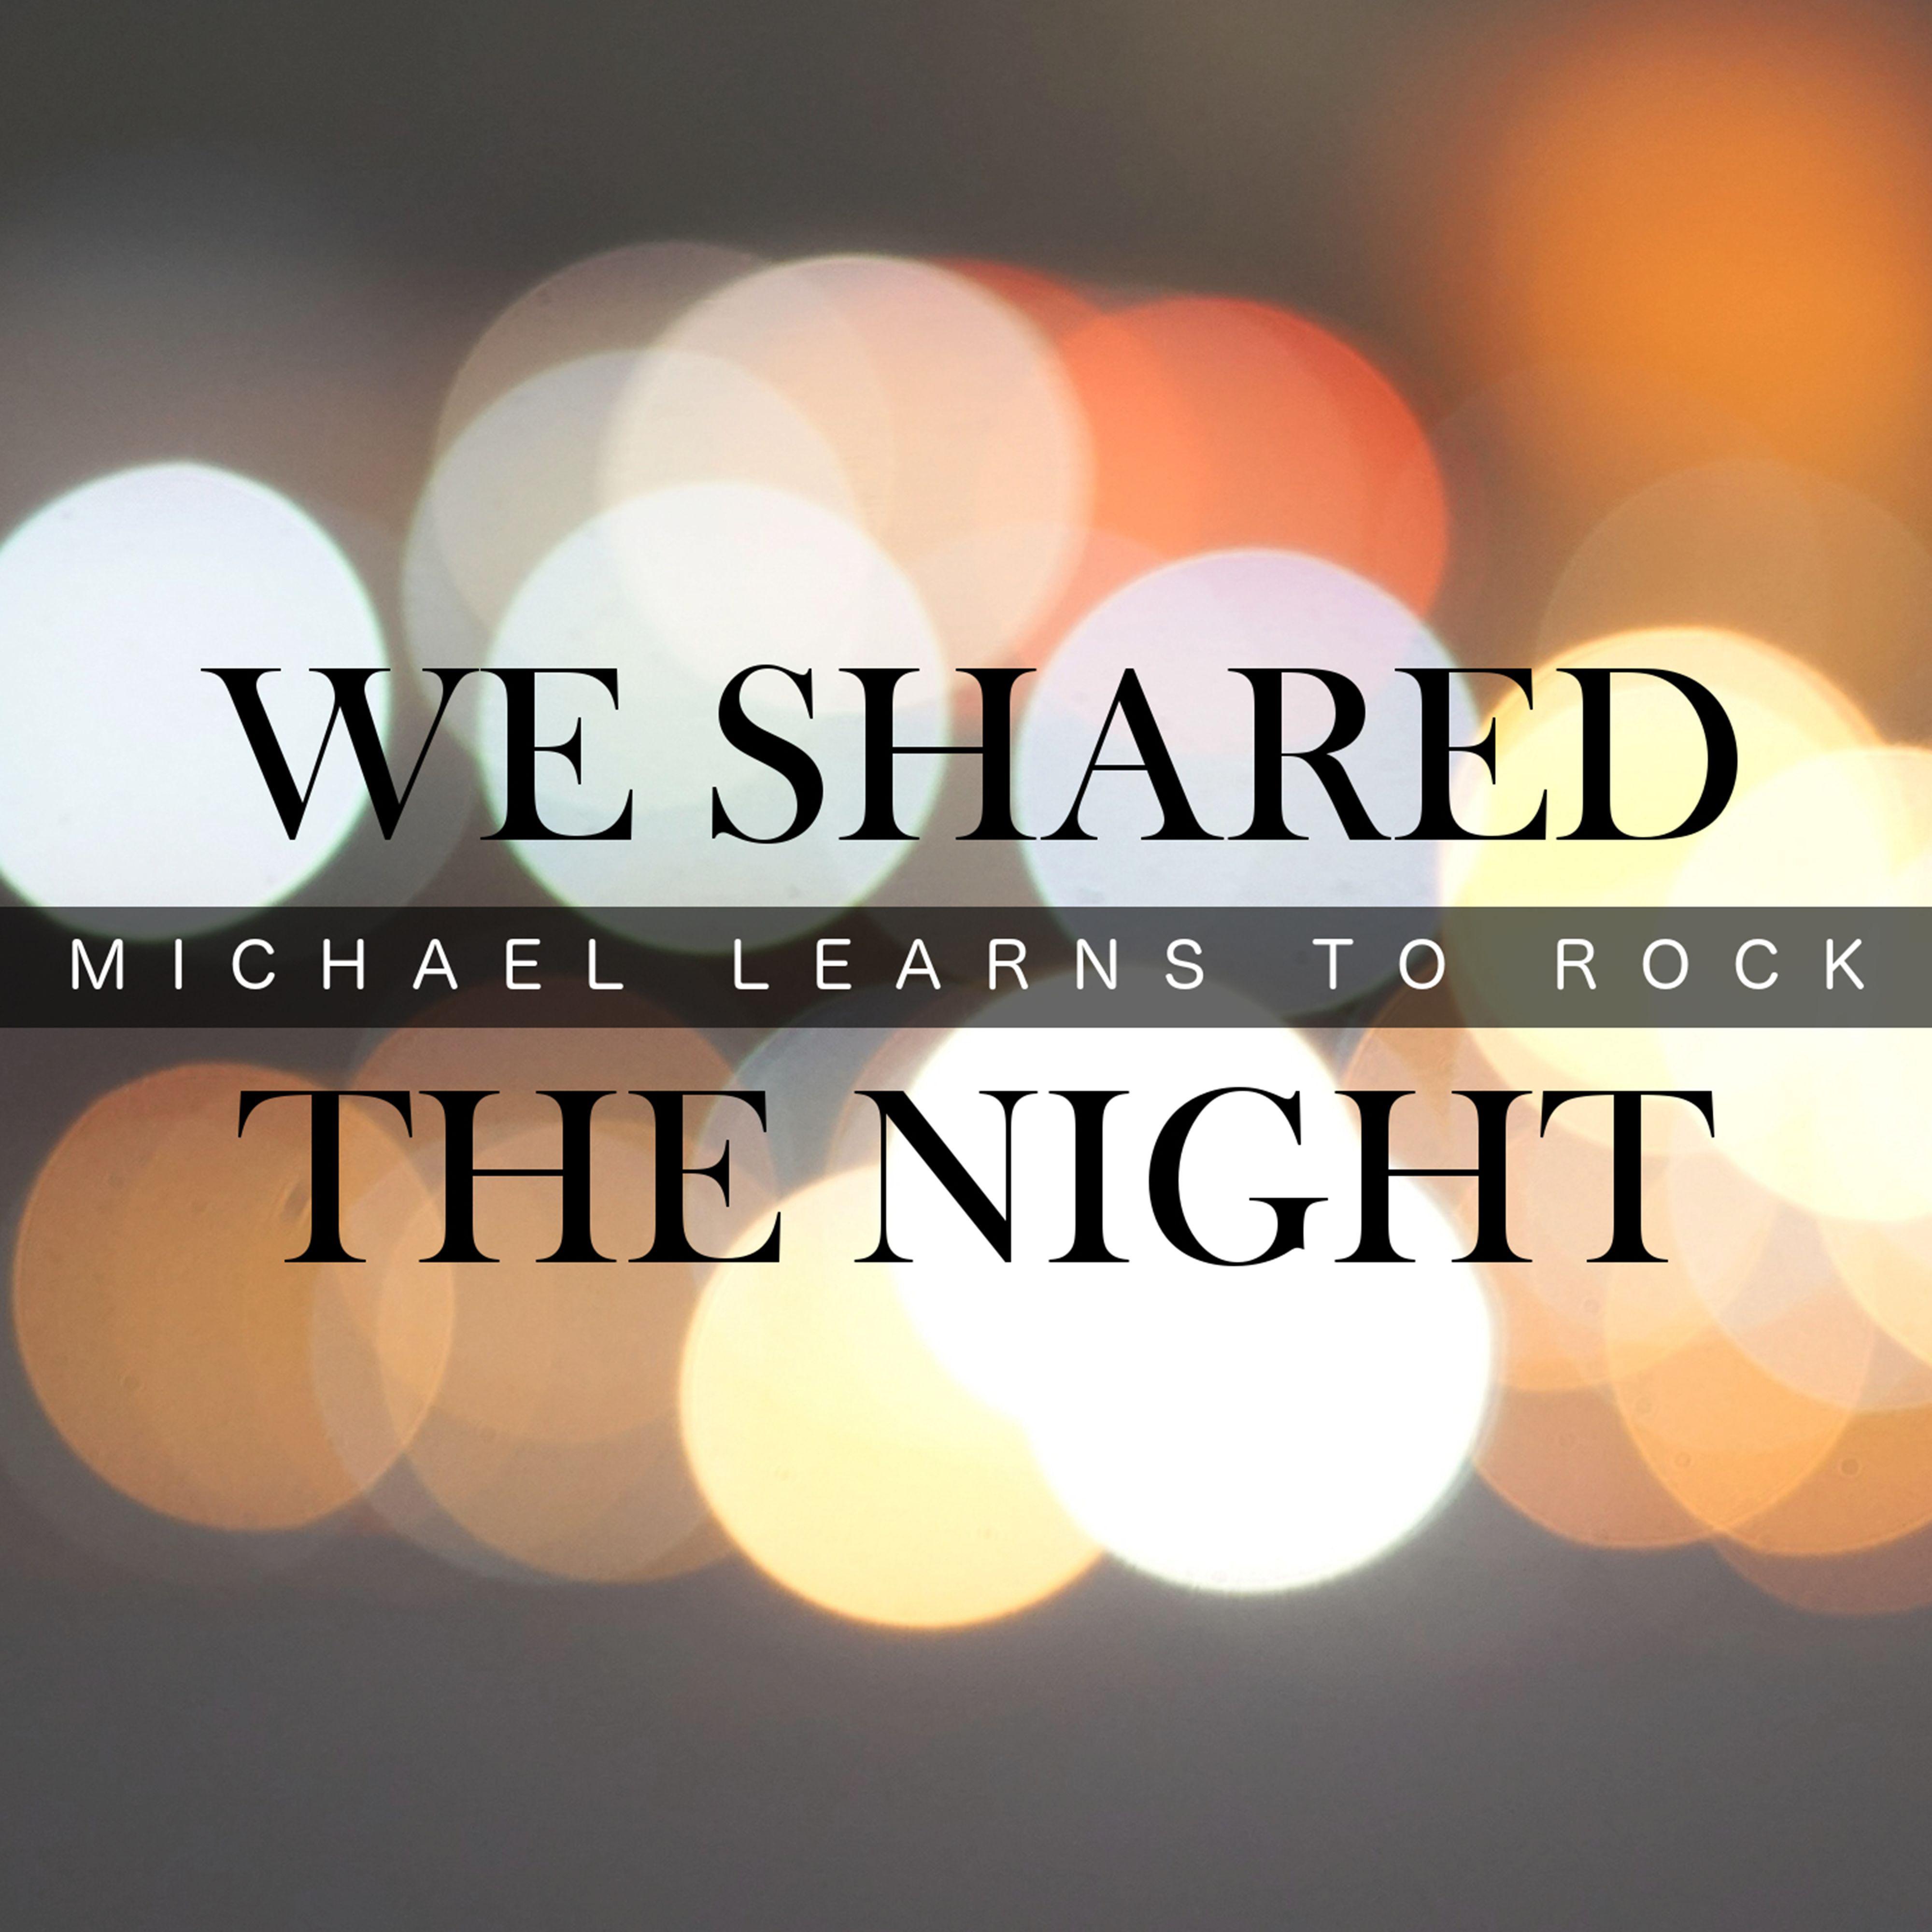 Michael Learns To Rock - We Shared The Night